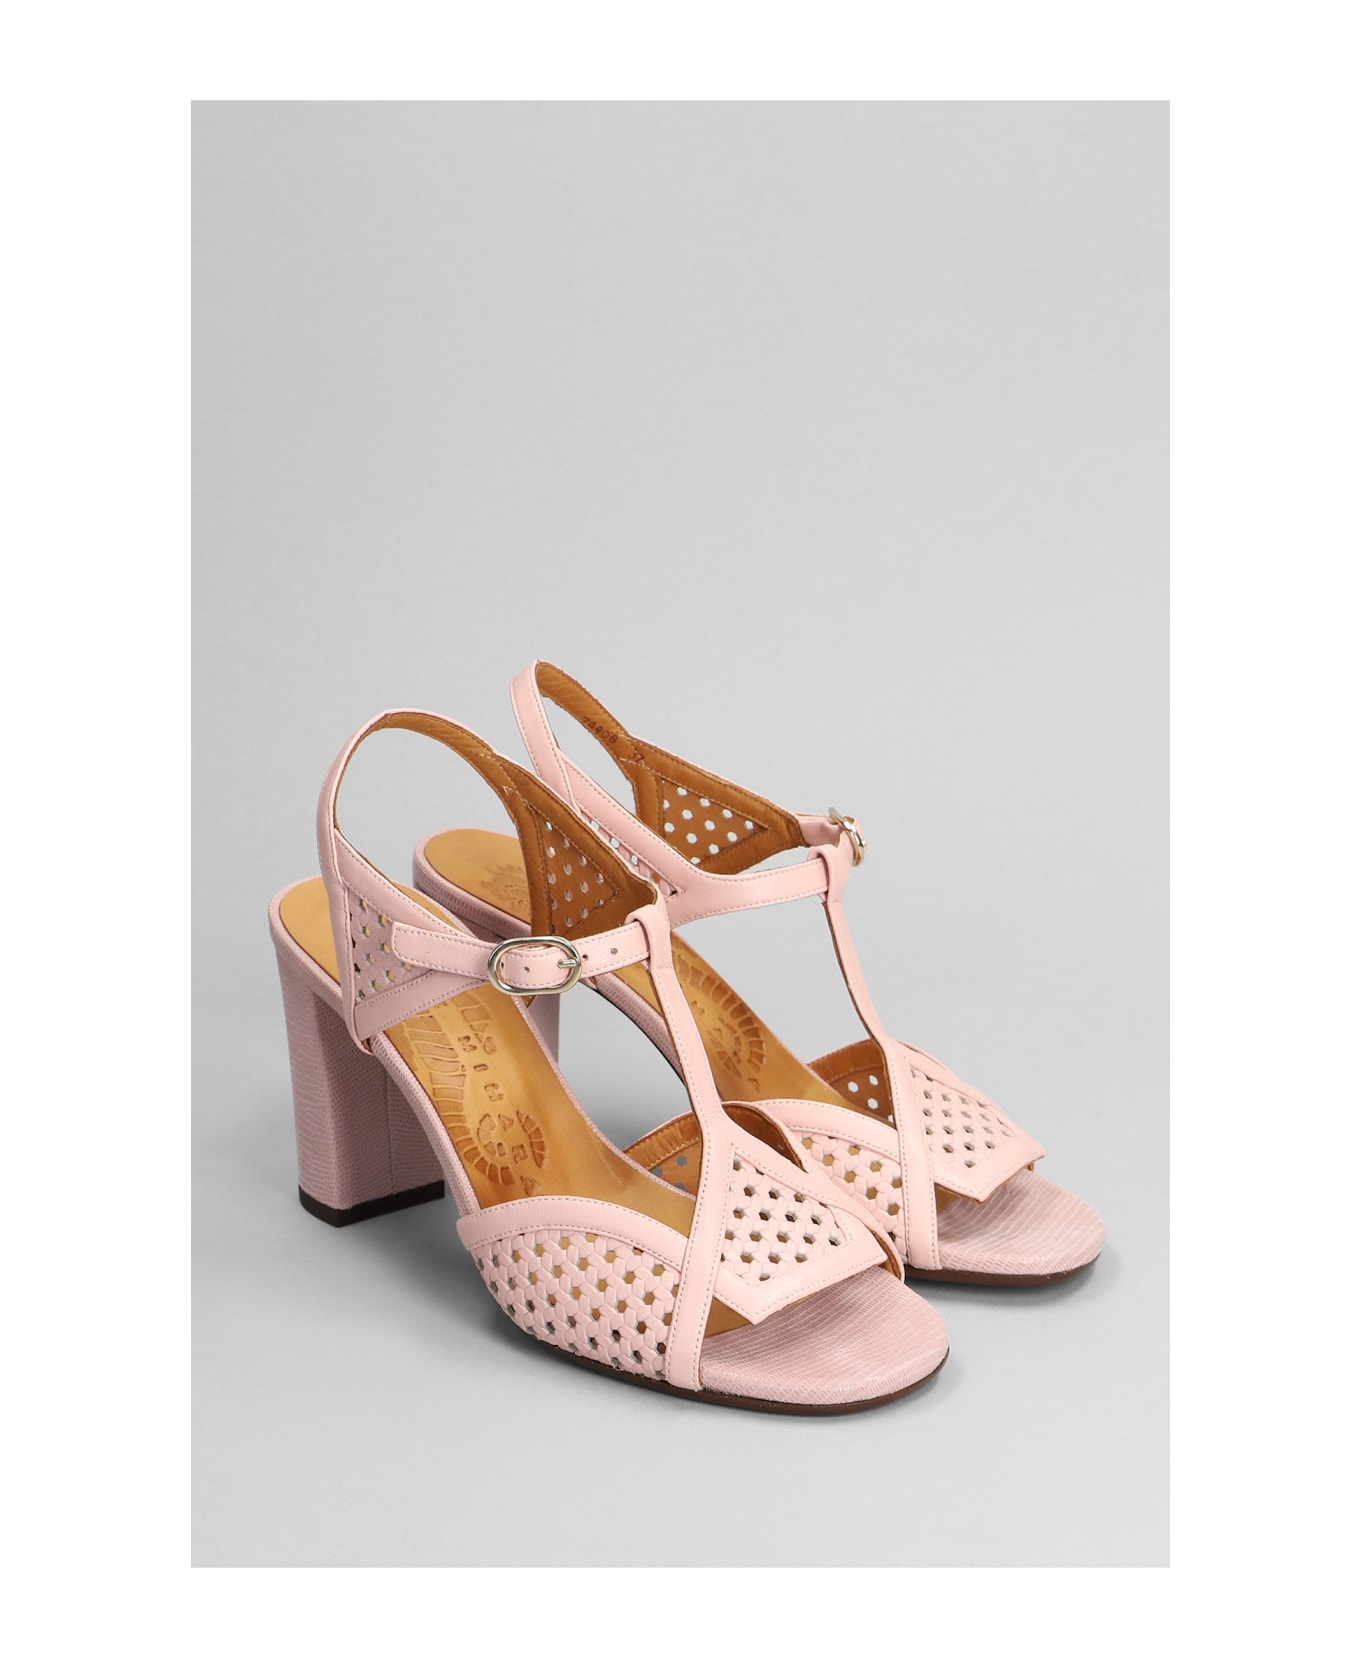 Chie Mihara Bessy Sandals In Rose-pink Leather - rose-pink サンダル